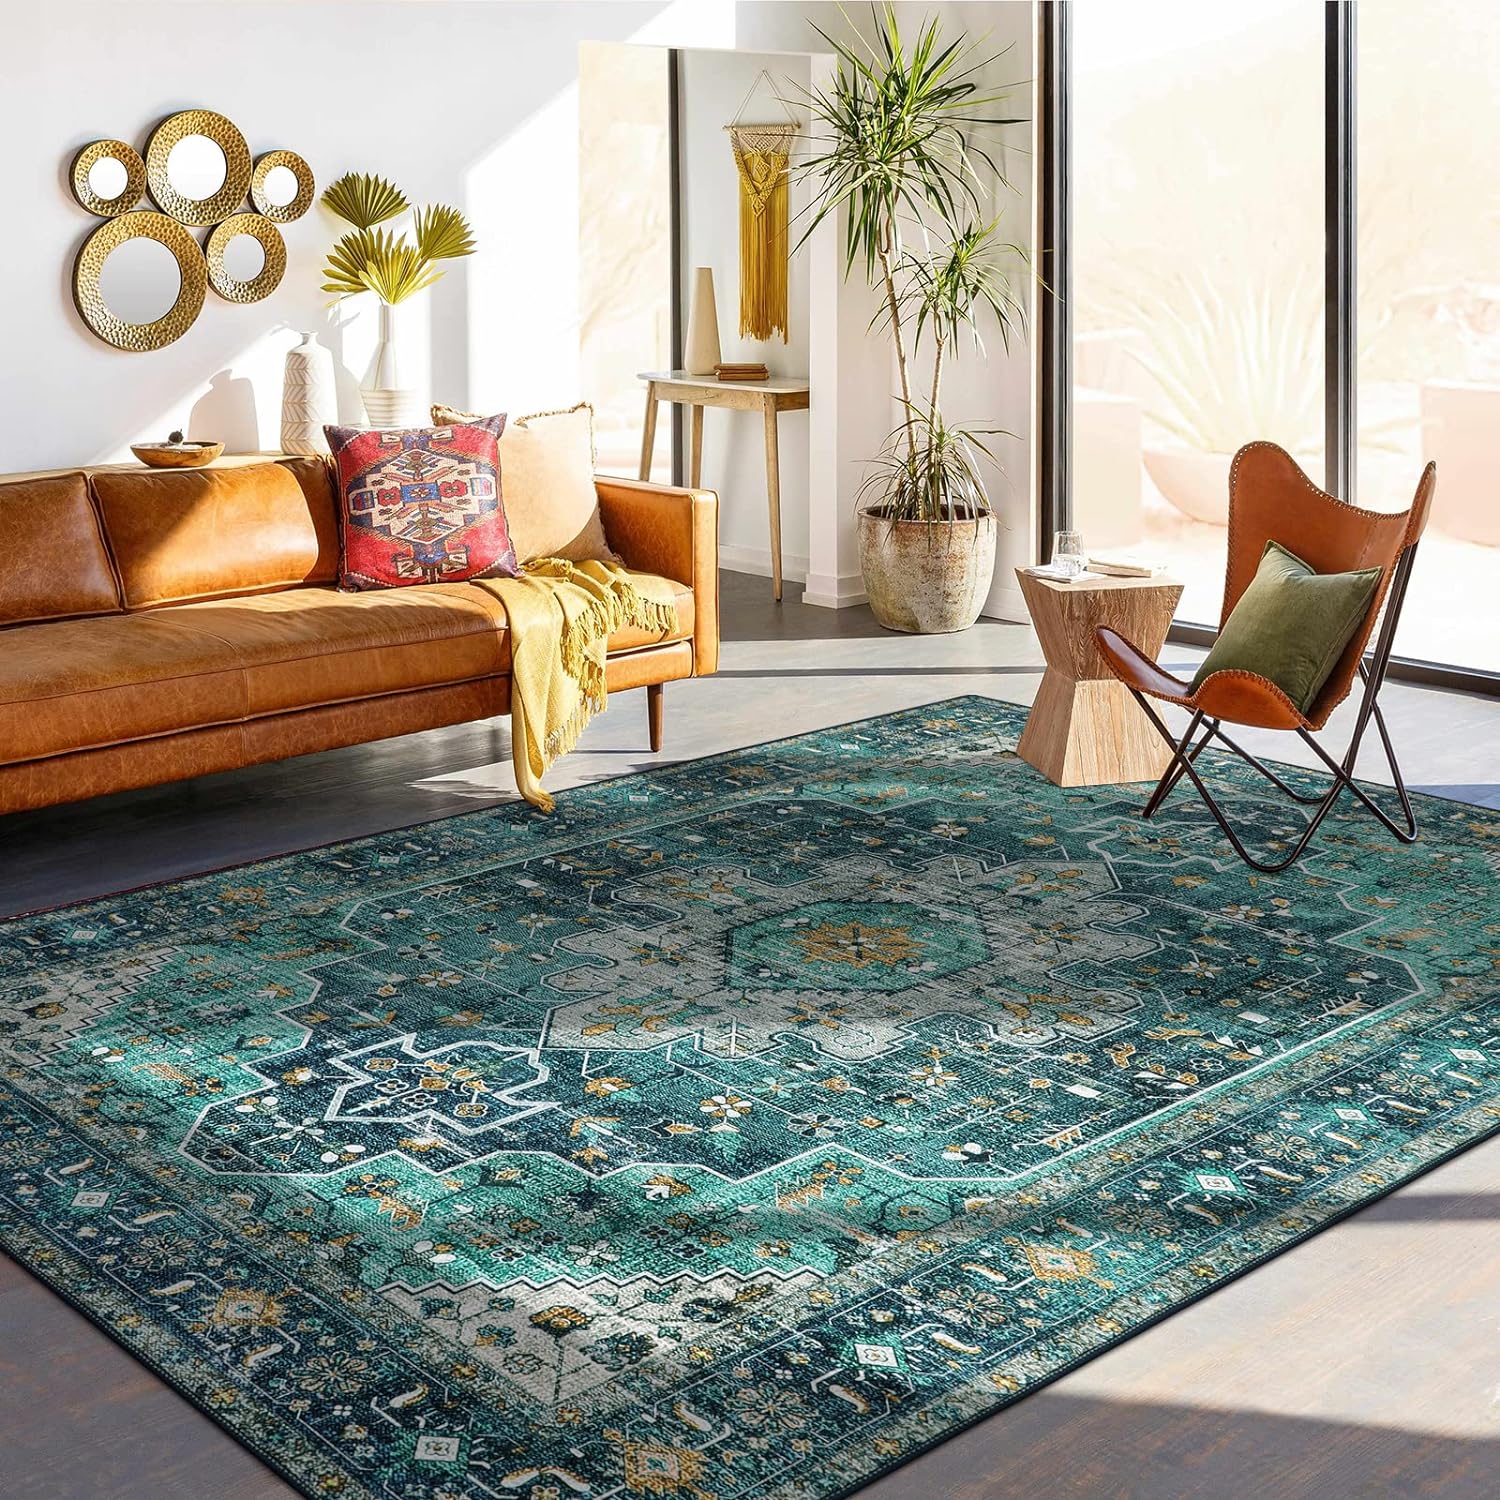 Special Discounts Available! Moynesa Ultra-Thin Vintage Area Rug - 8x10 Teal Bedroom Rug